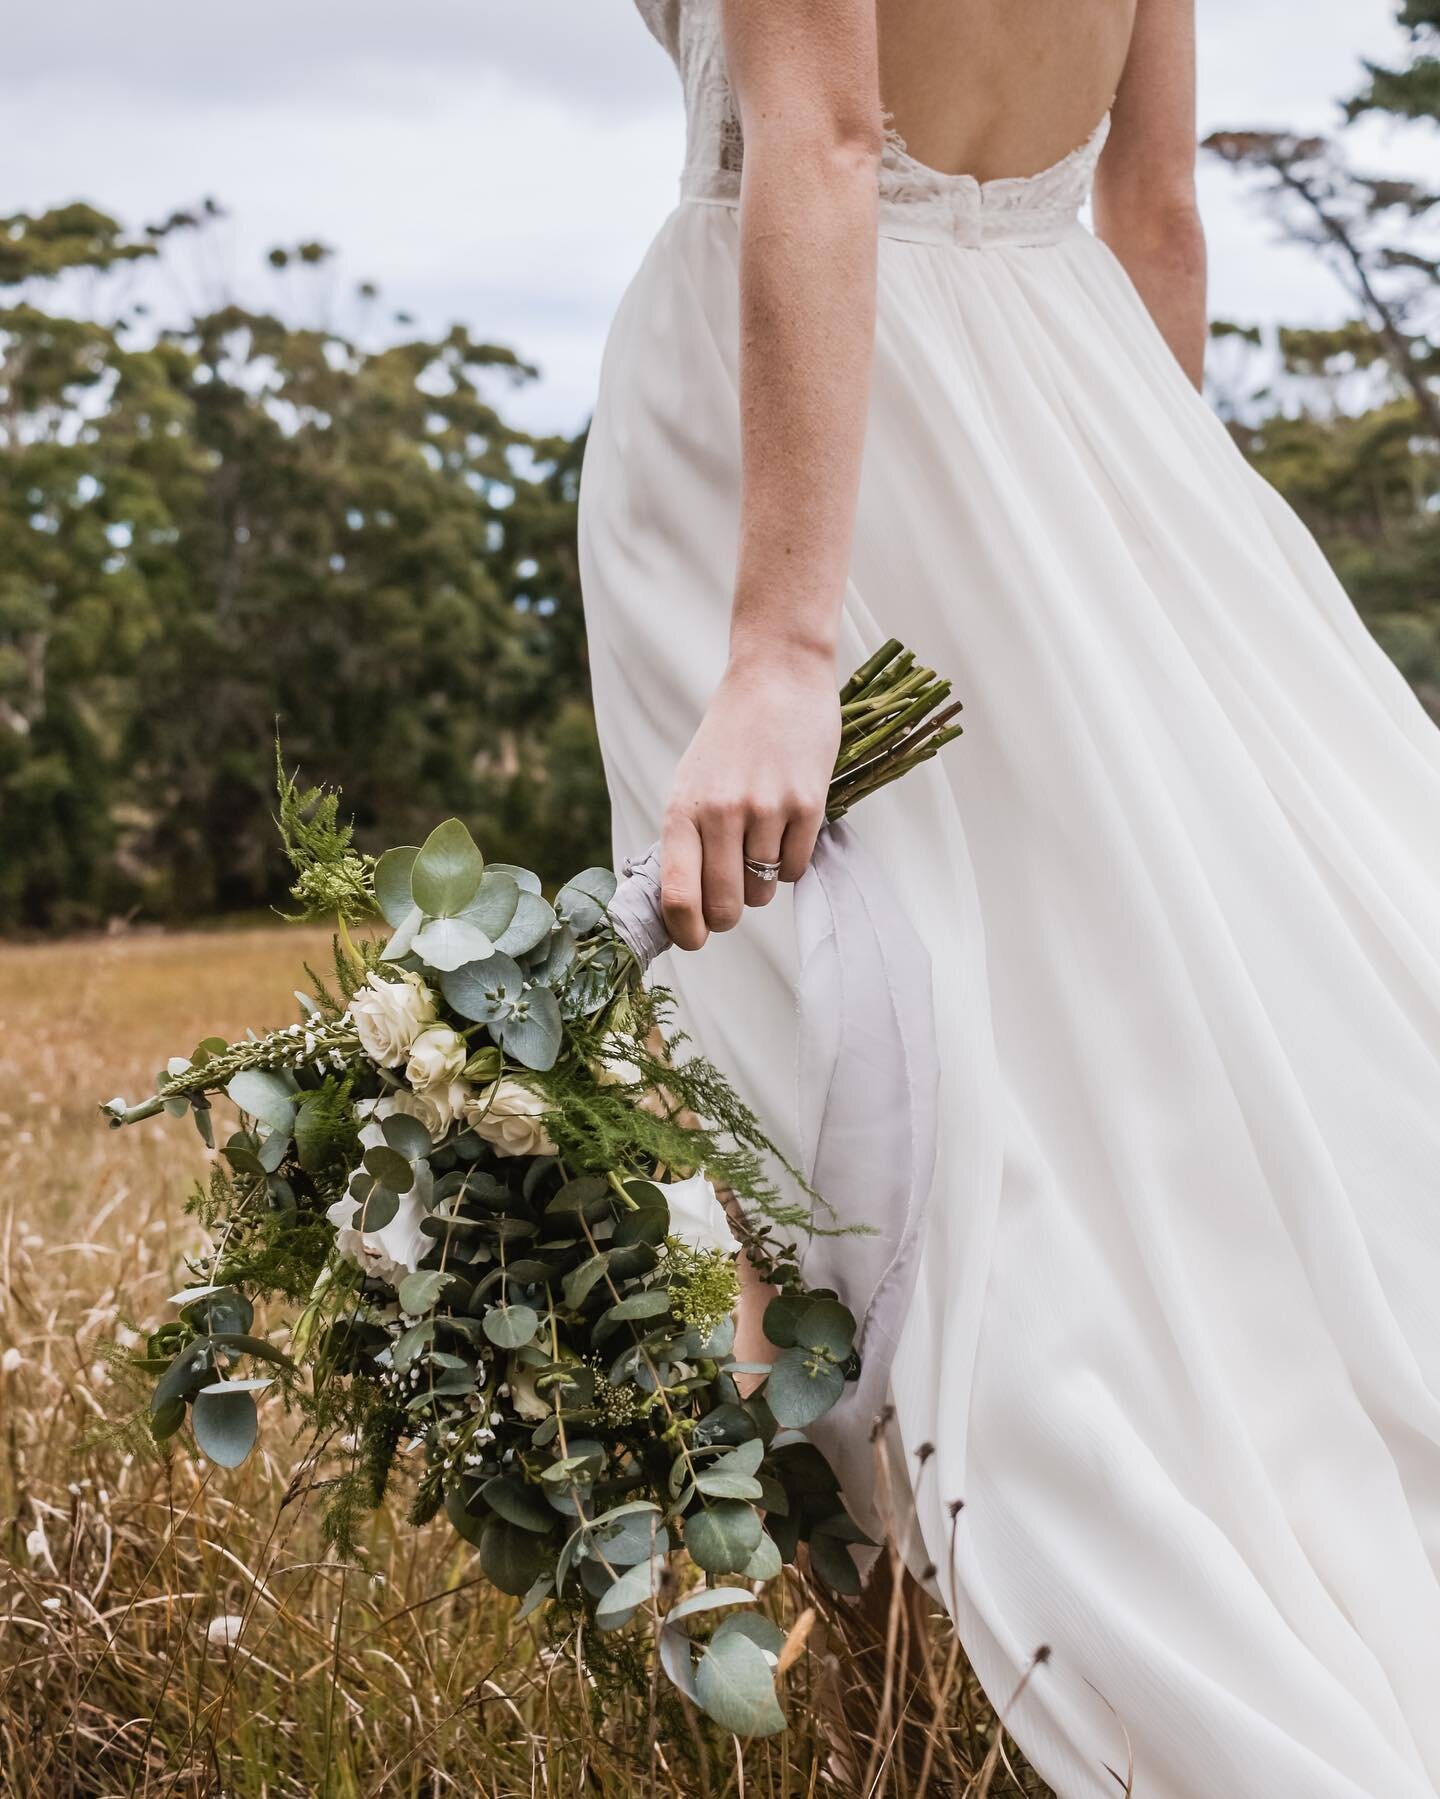 Why should you hire a planner?

Long story short&hellip;to enjoy your wedding to the fullest! ✨There are so many reasons to hire a wedding planner but in the end we are there to make sure you are able to enjoy it + really take in the moments of your 